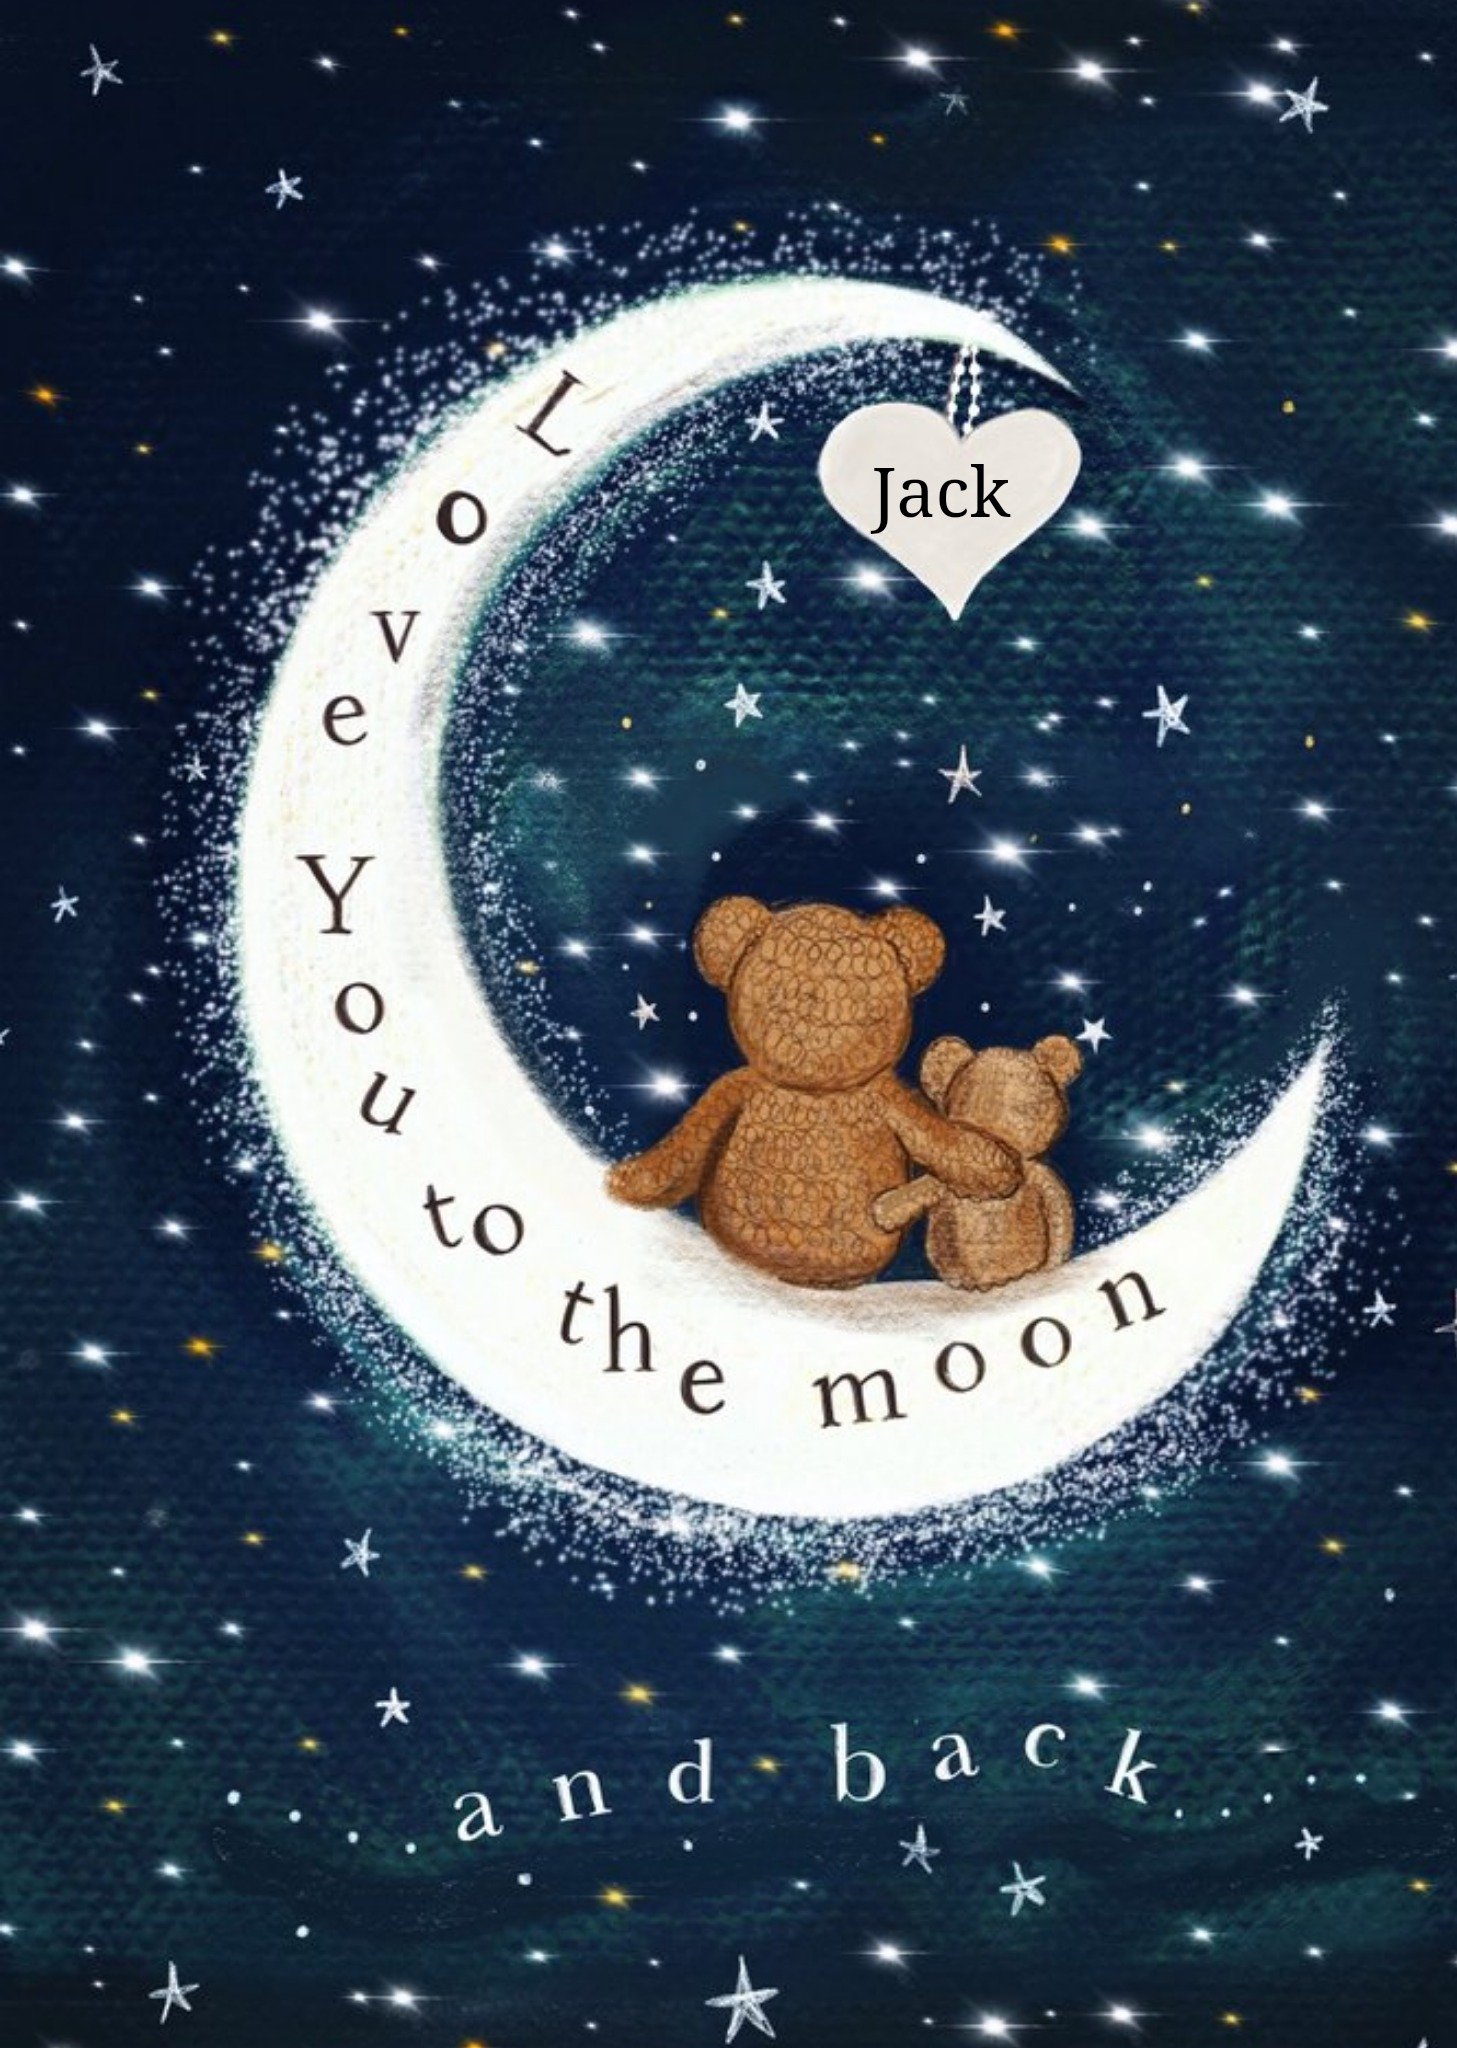 Moonpig Illustration Of Two Bears Sitting On The Moon Surrounded By Stars Card, Large